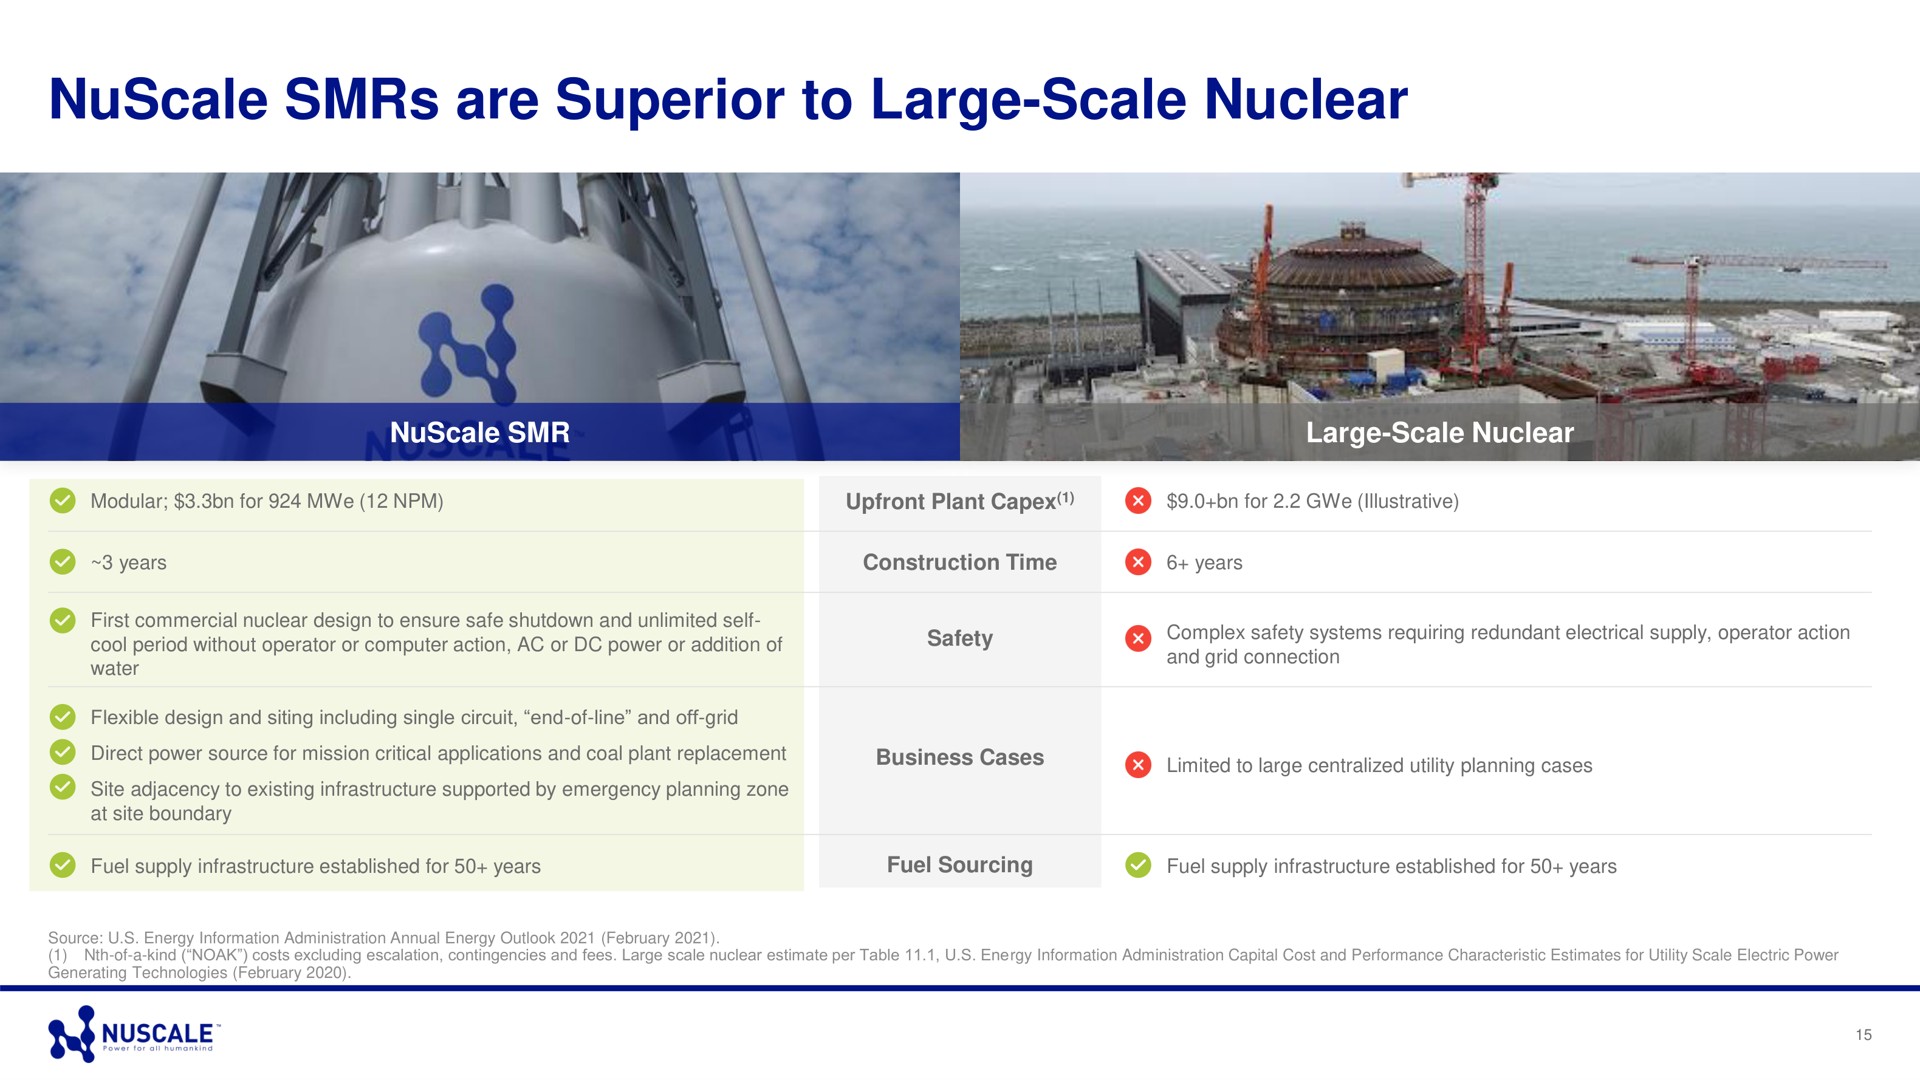 are superior to large scale nuclear | Nuscale